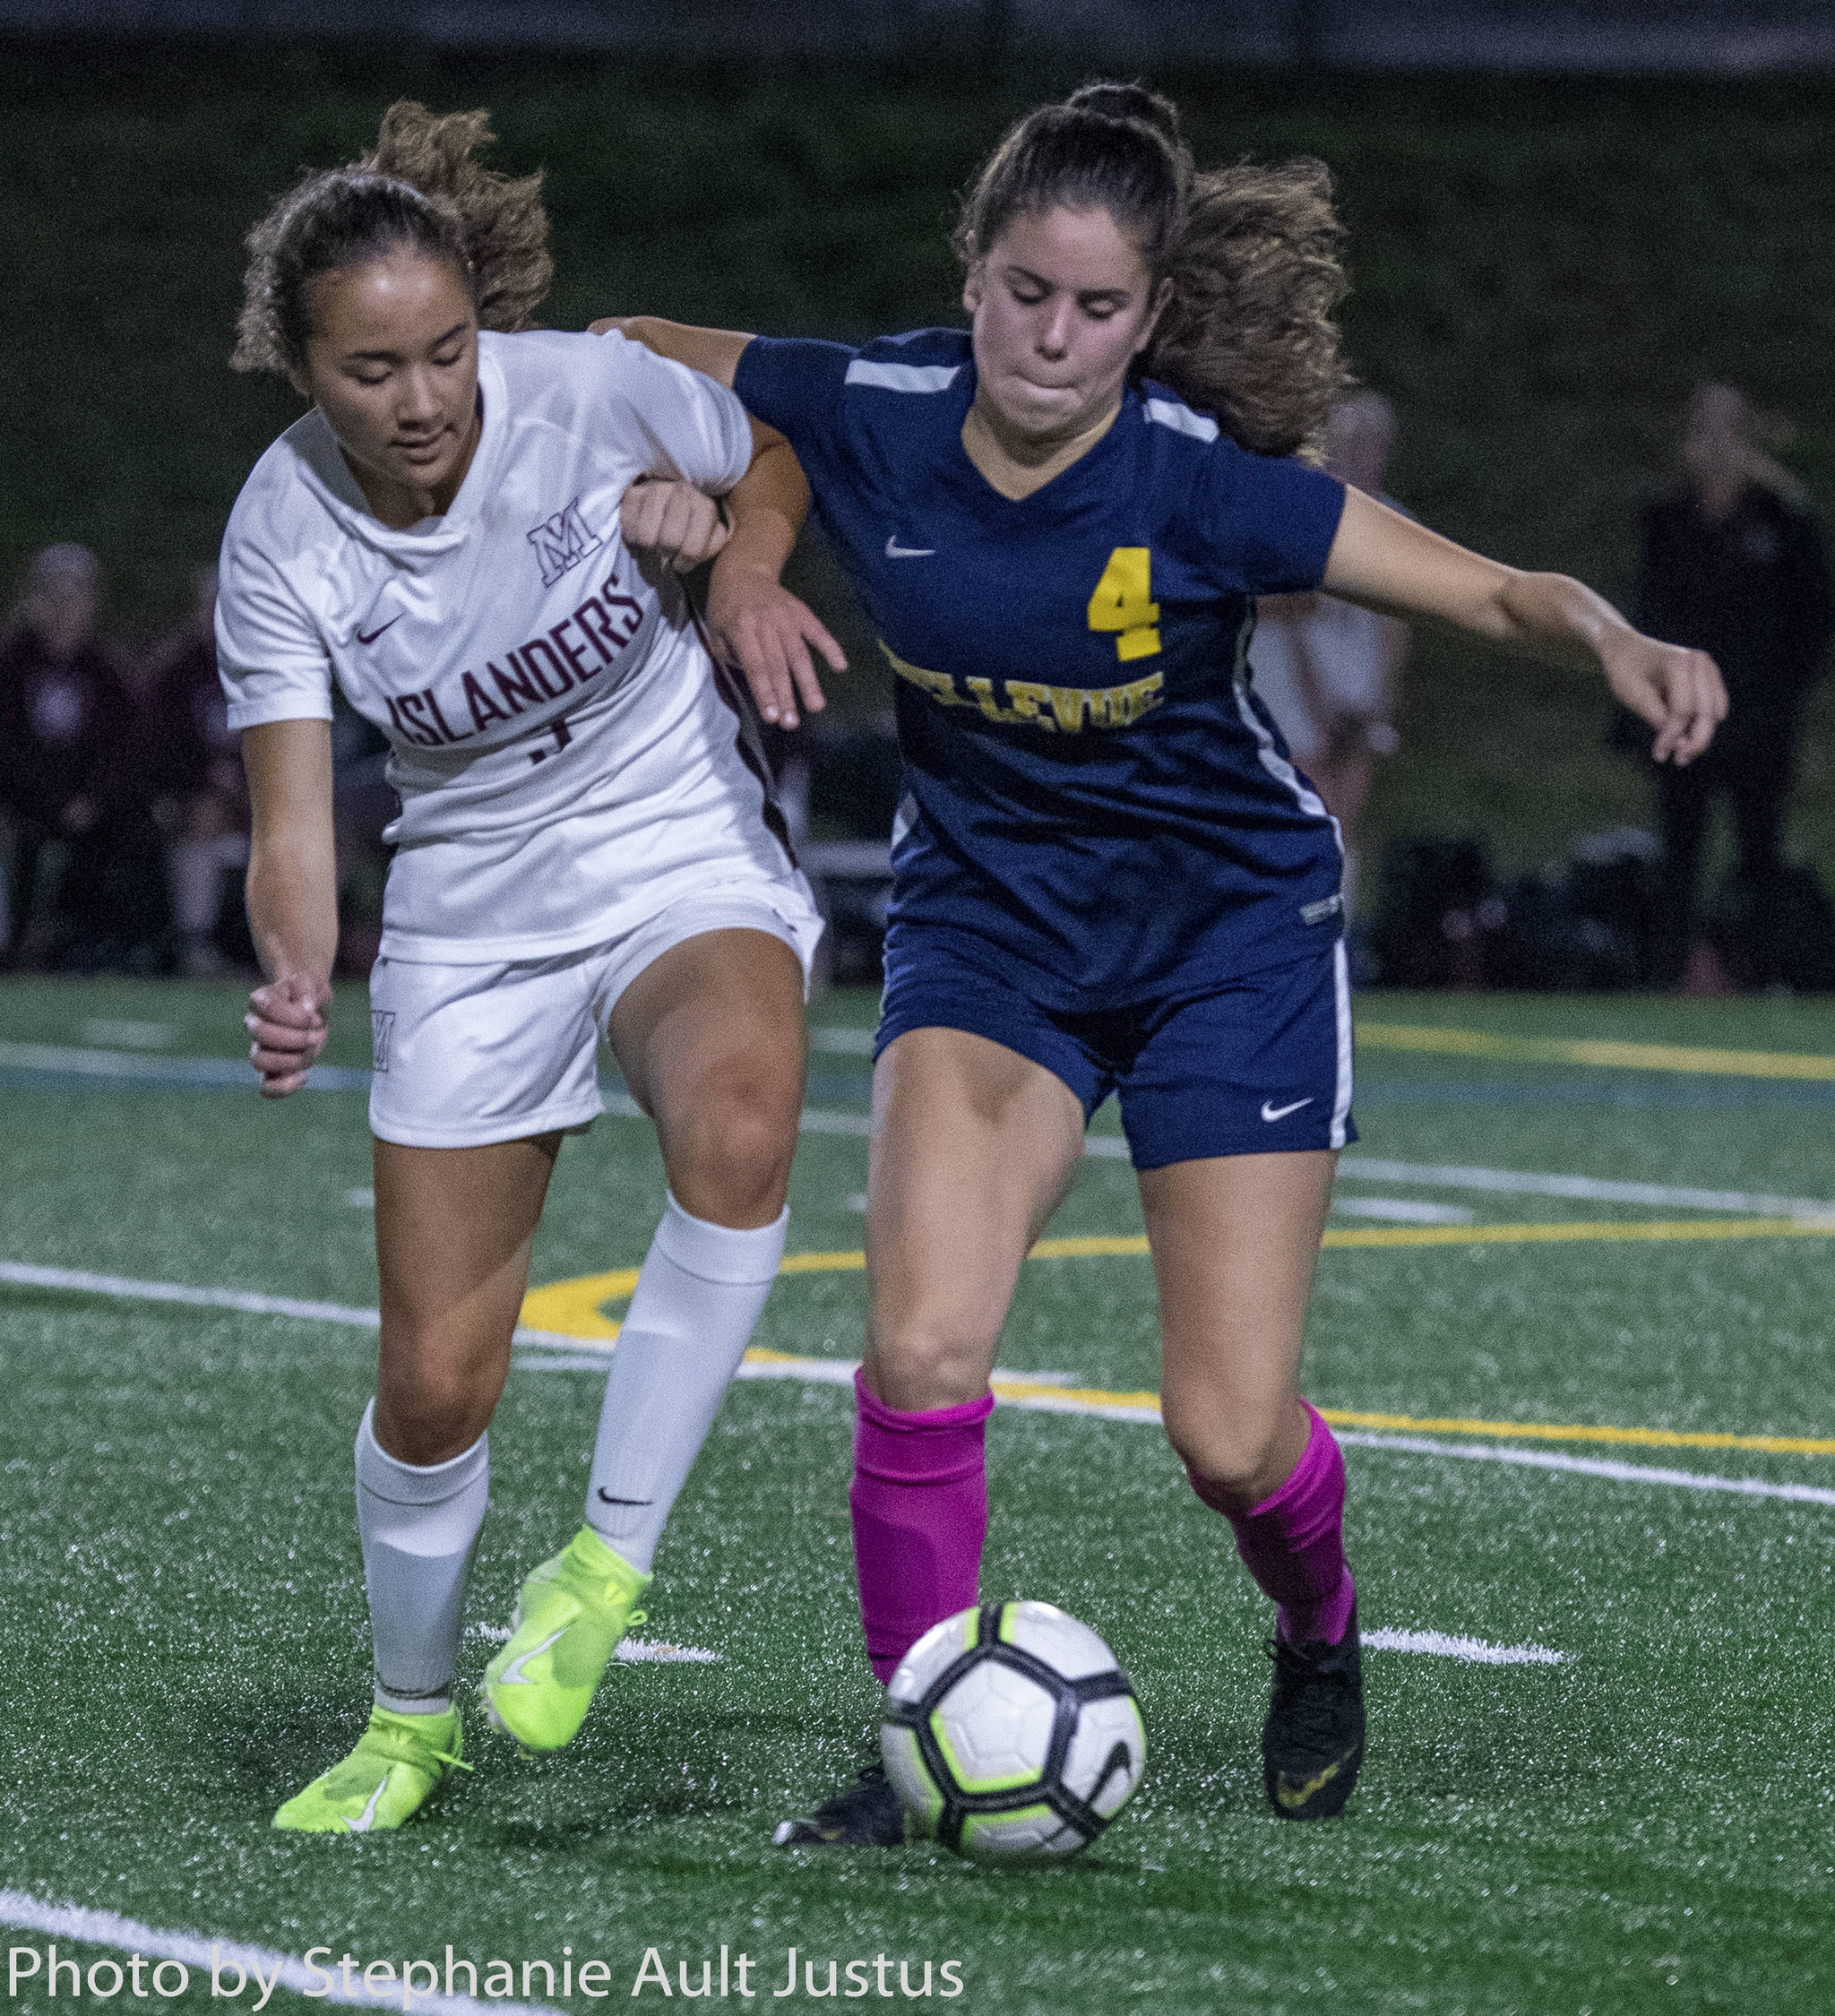 Mercer Island midfielder Emily Yang (left) and Bellevue midfielder Audrey Miller (right) fight for the ball during a 1-1 draw on Oct. 7. Yang scored the lone goal for the Islanders in the tie. Photo courtesy of Stephanie Ault Justus